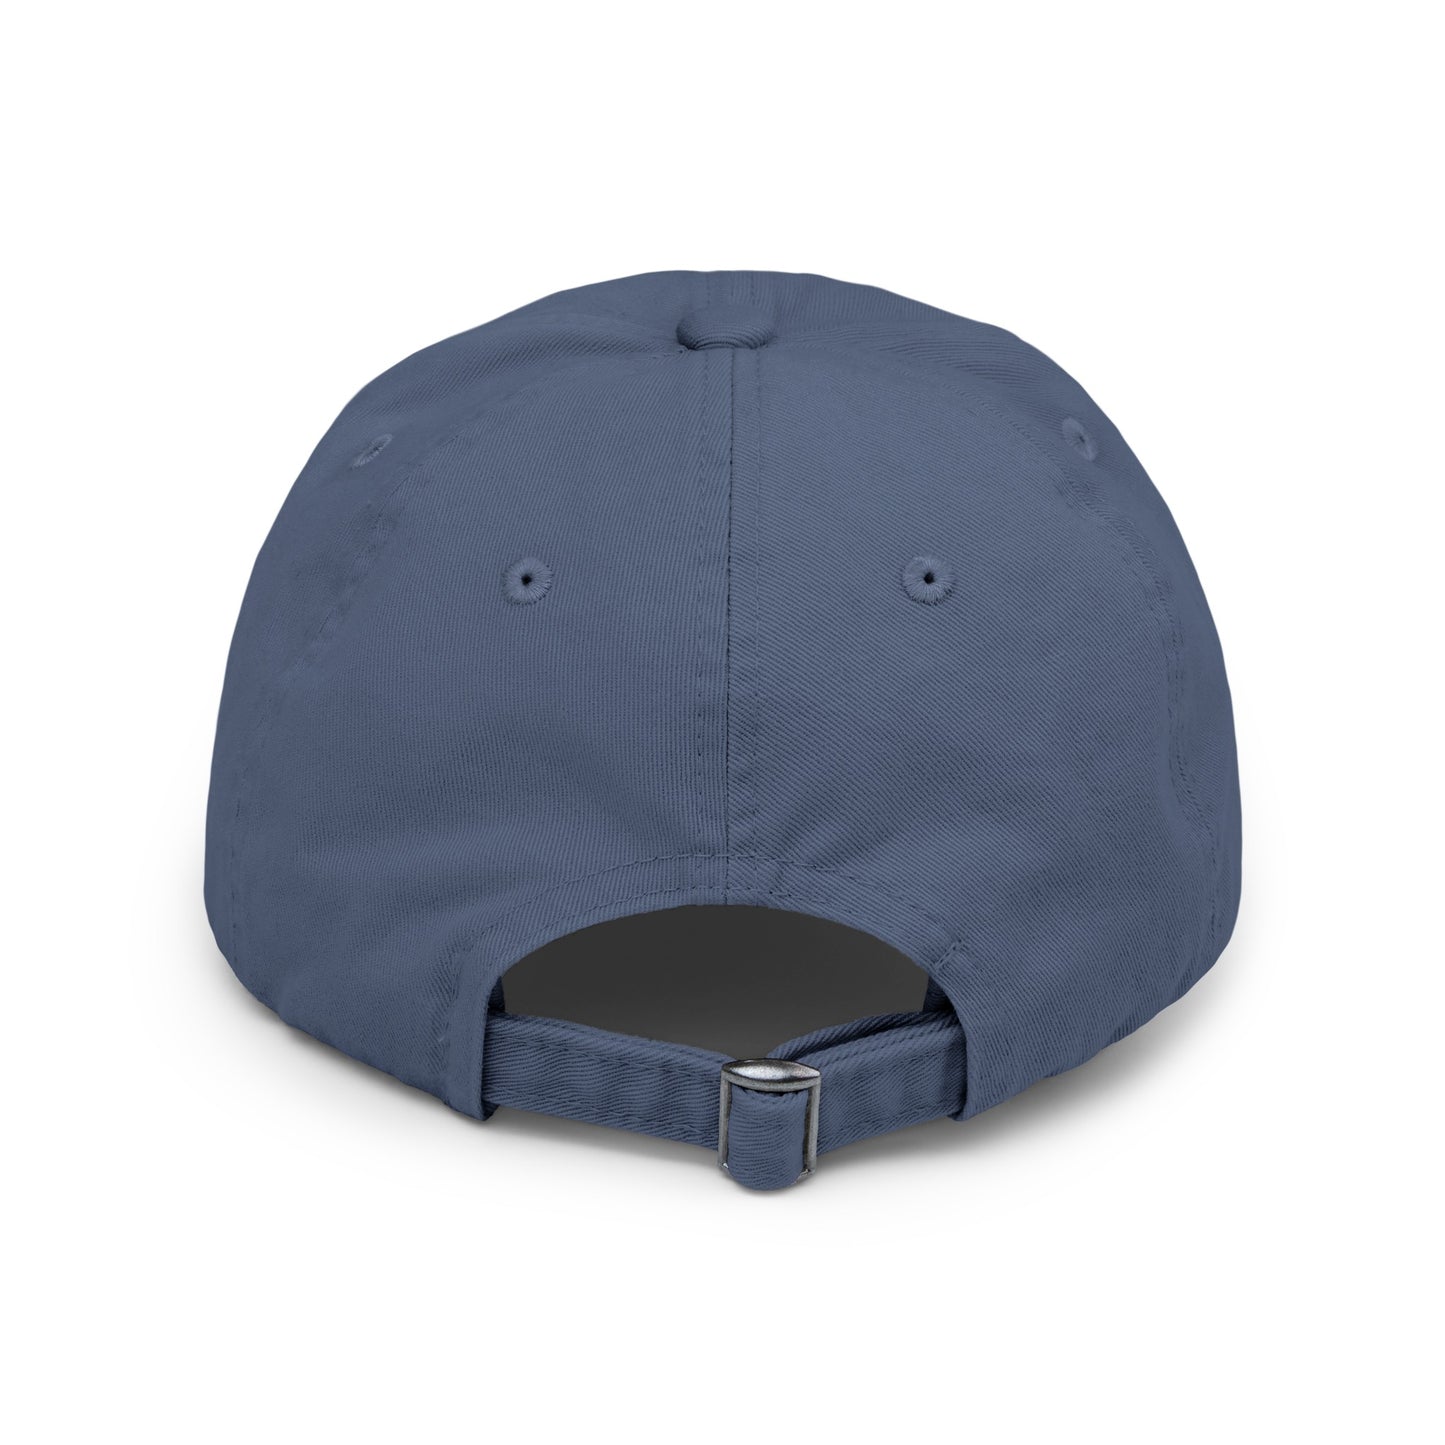 the back of a blue hat on a white background